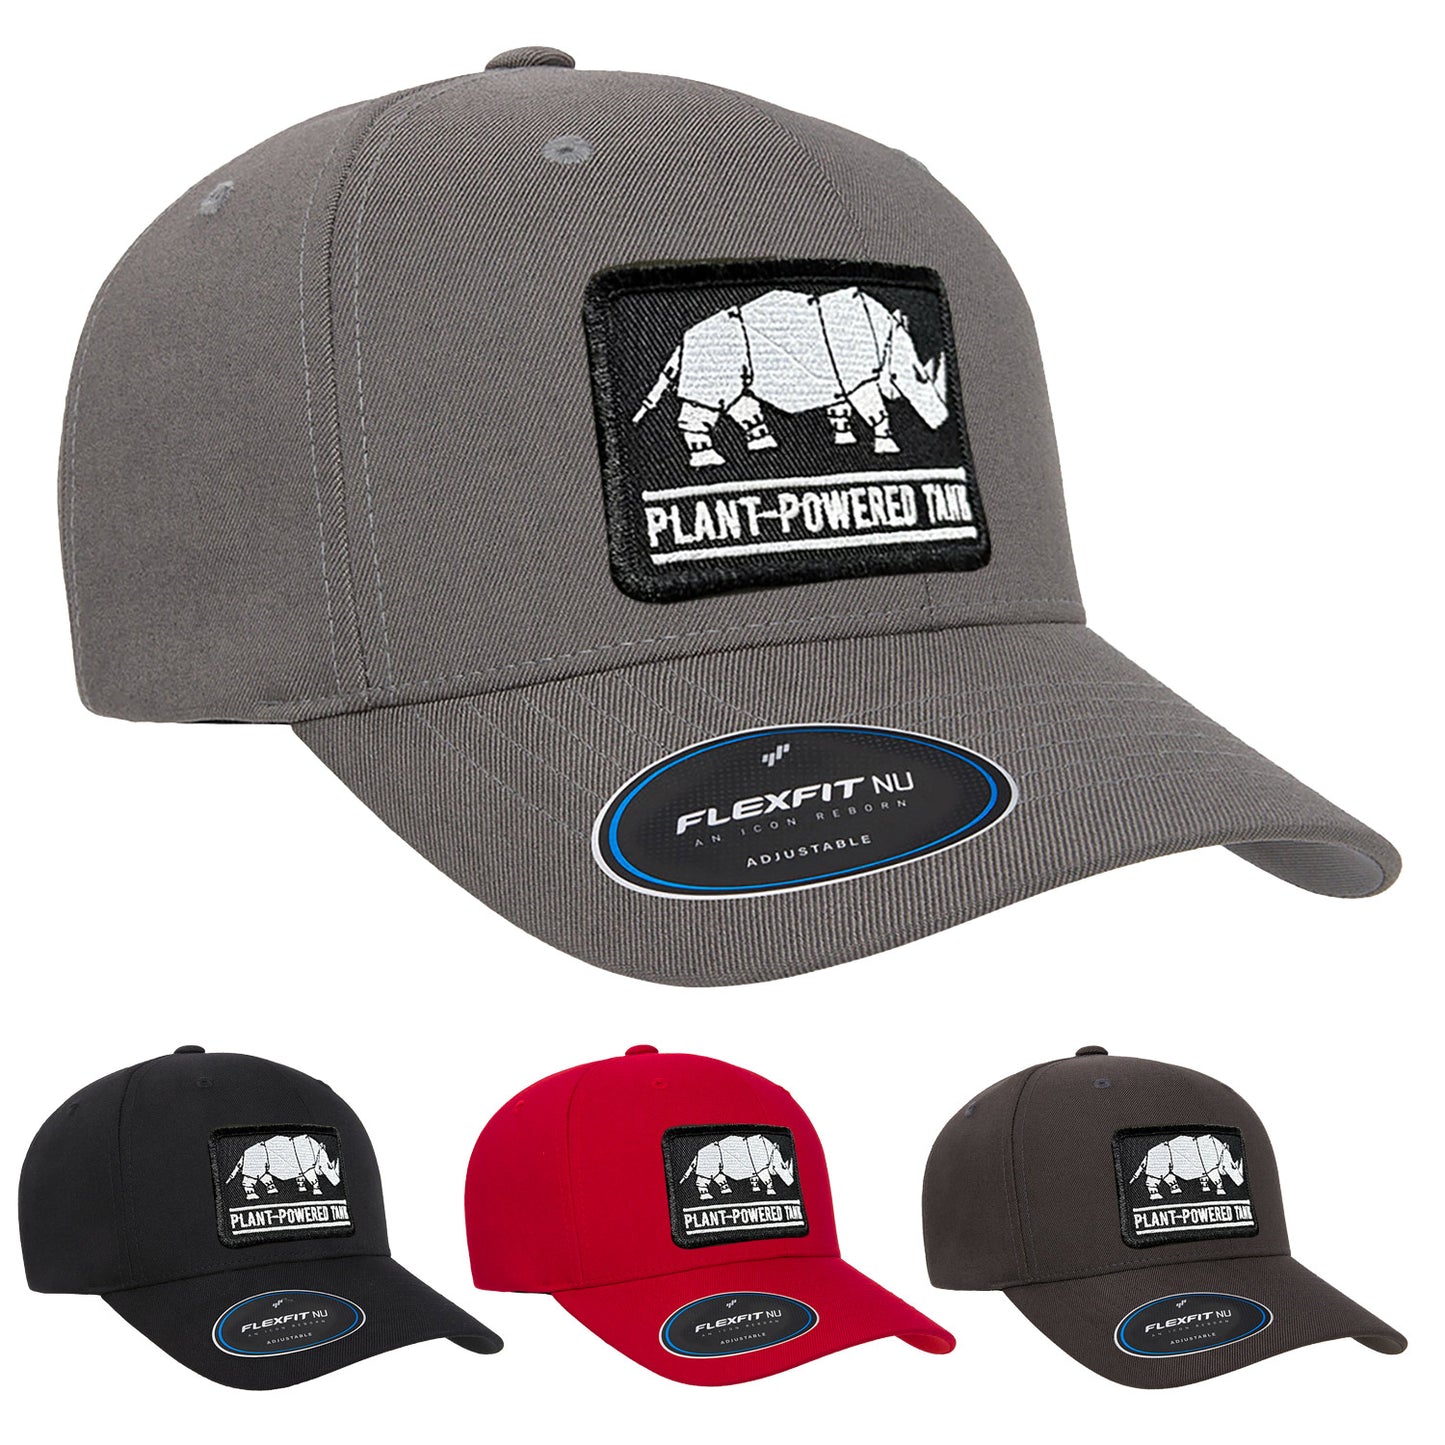 Plant-Powered Tank Flexifit Snap-Back Hat - Available in 4 Colors